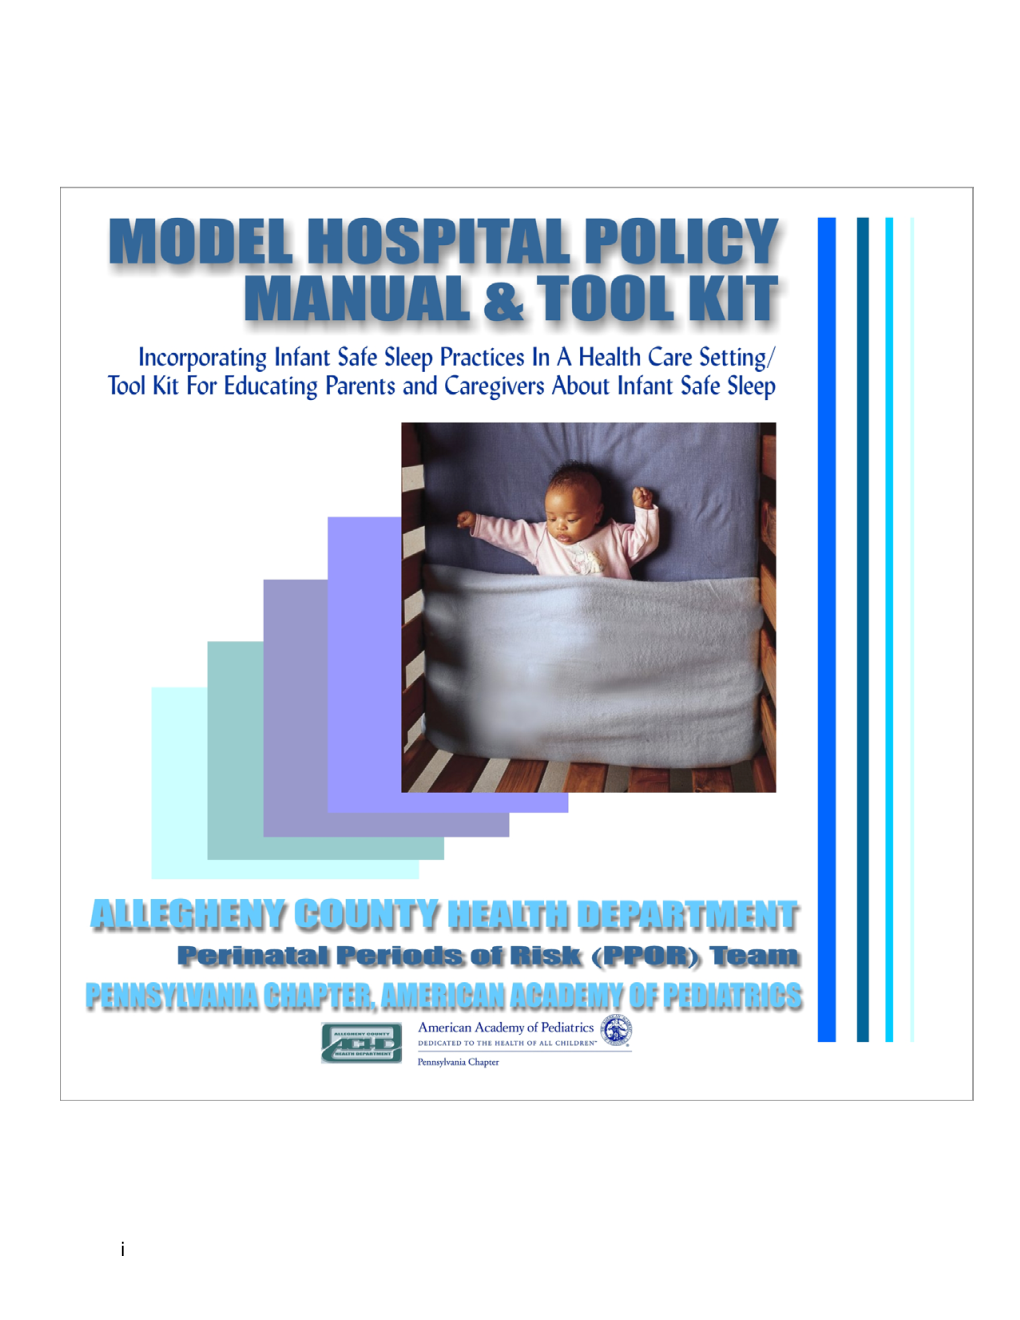 Model Hospital Policy Manual and Tool